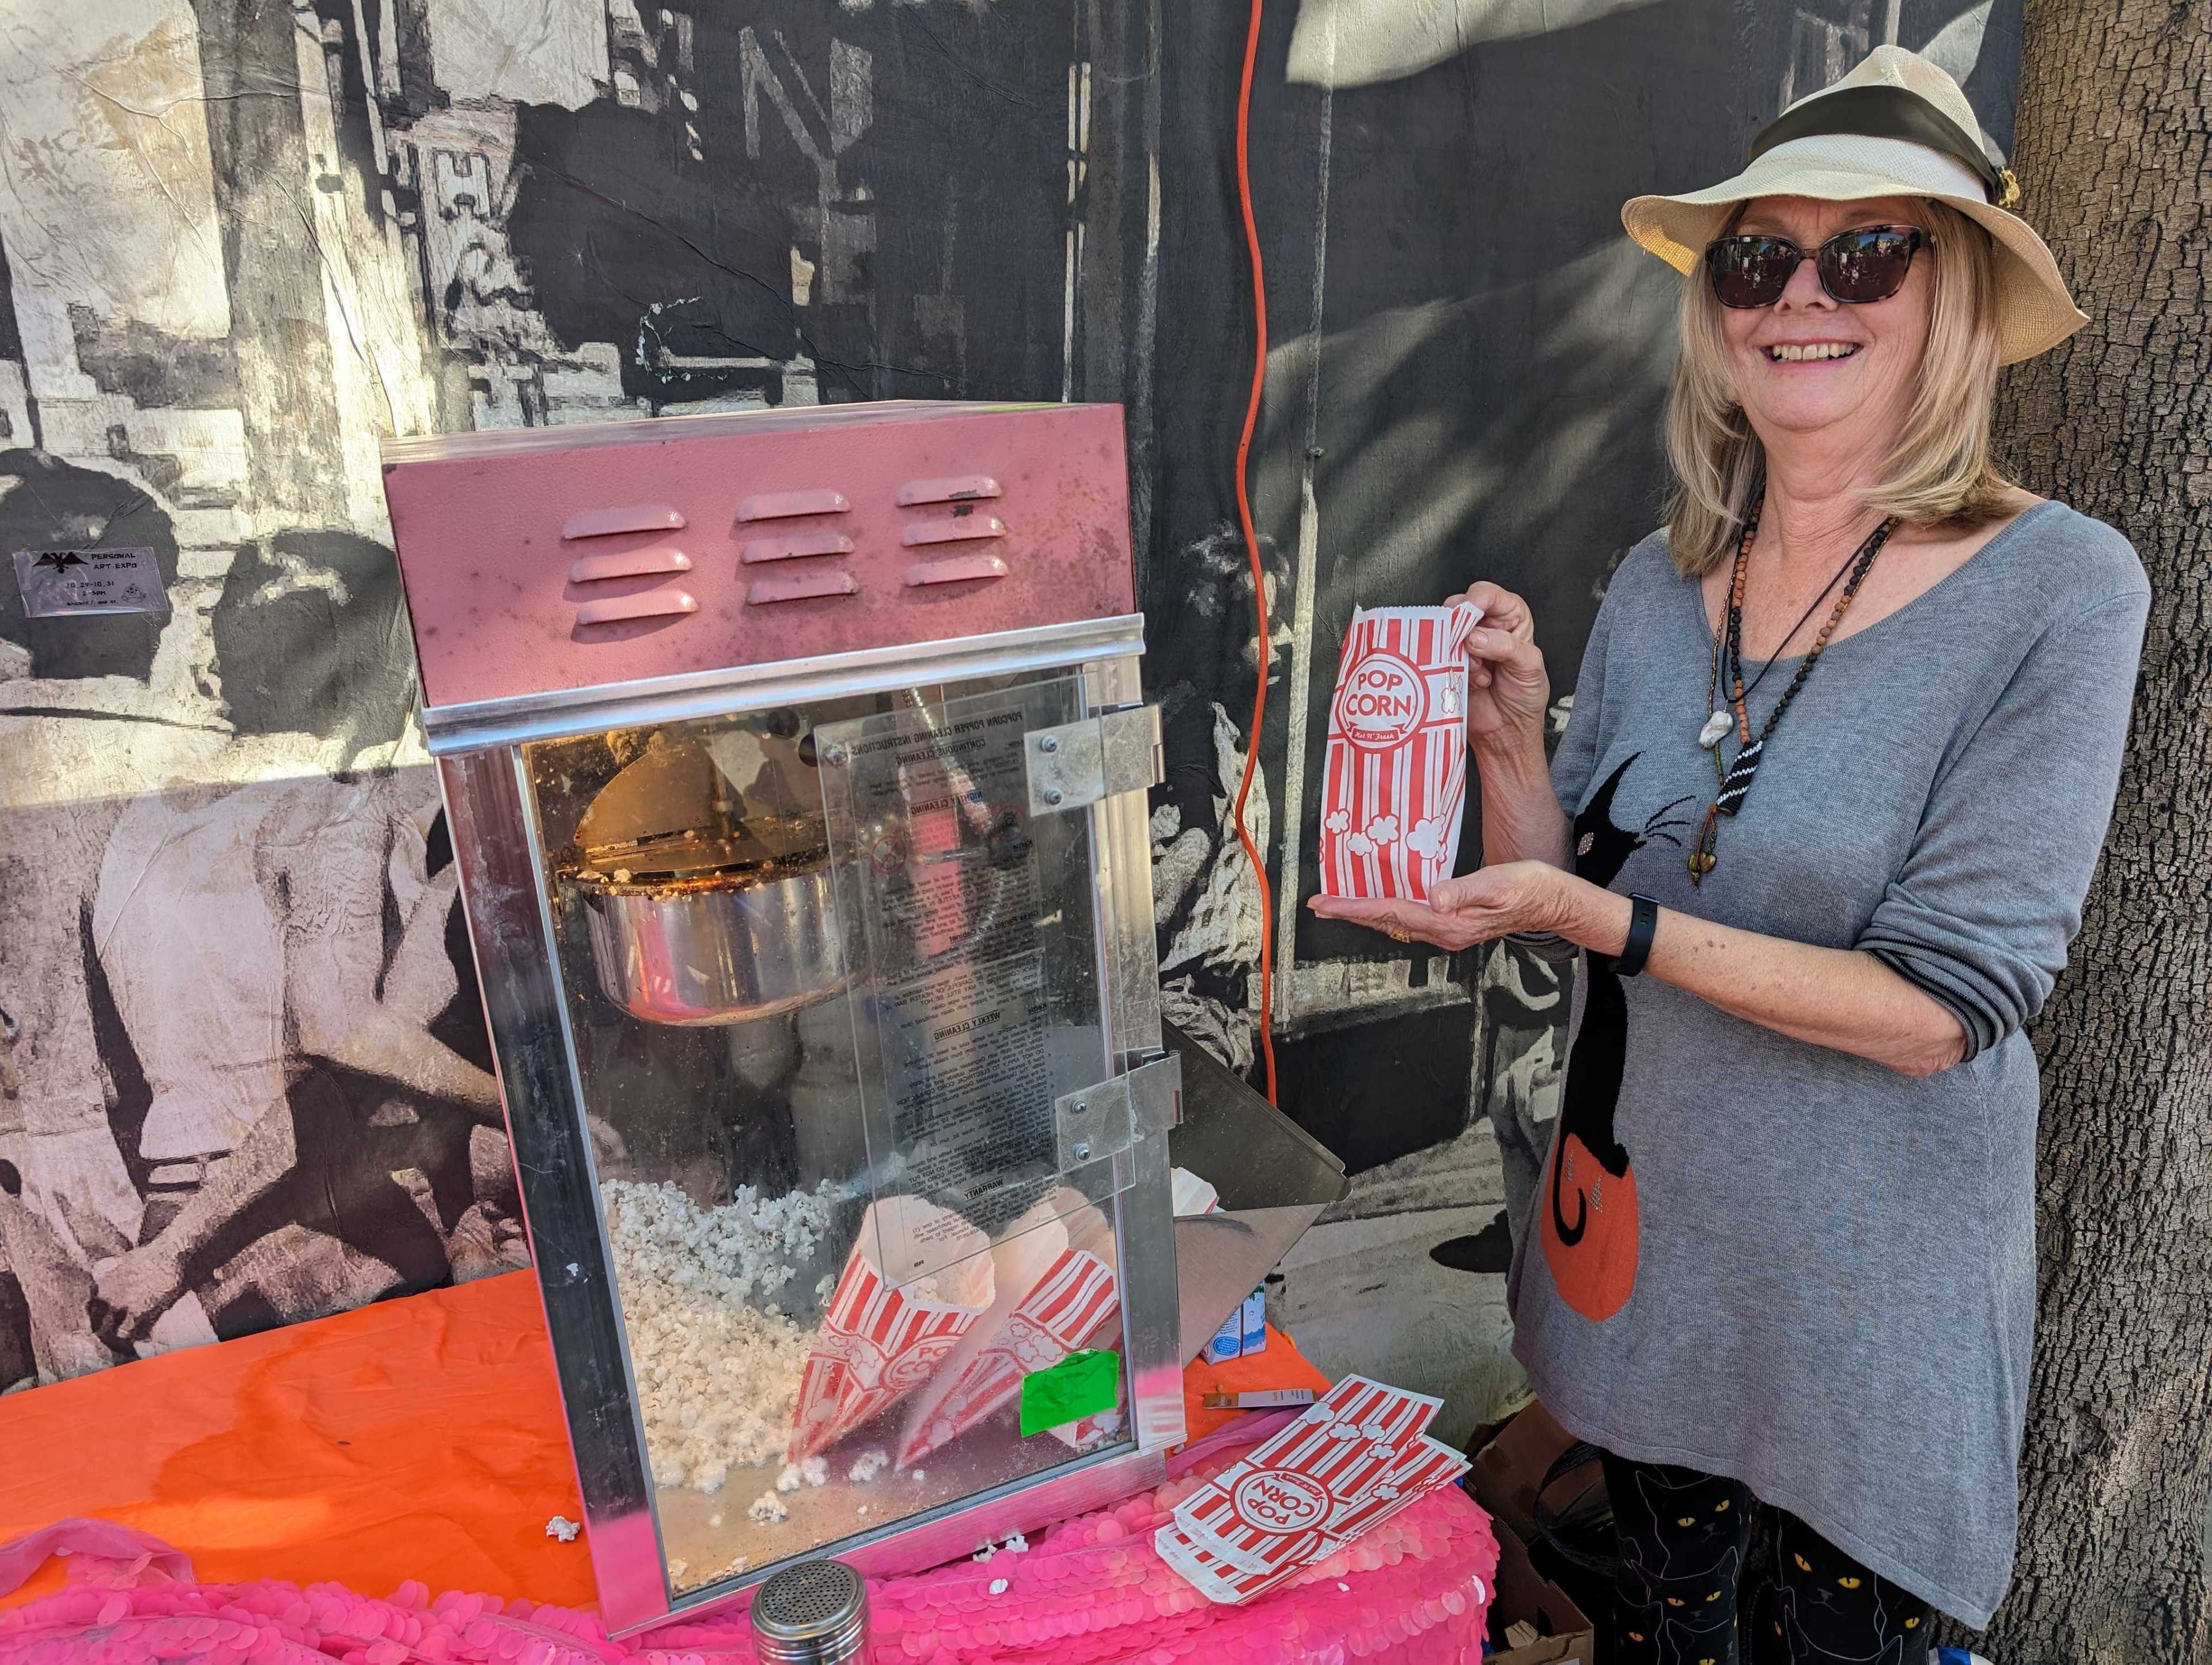 Susan Porter Beckstead worked a popcorn machine Sunday at a Halloween block party at Market and Noe streets.